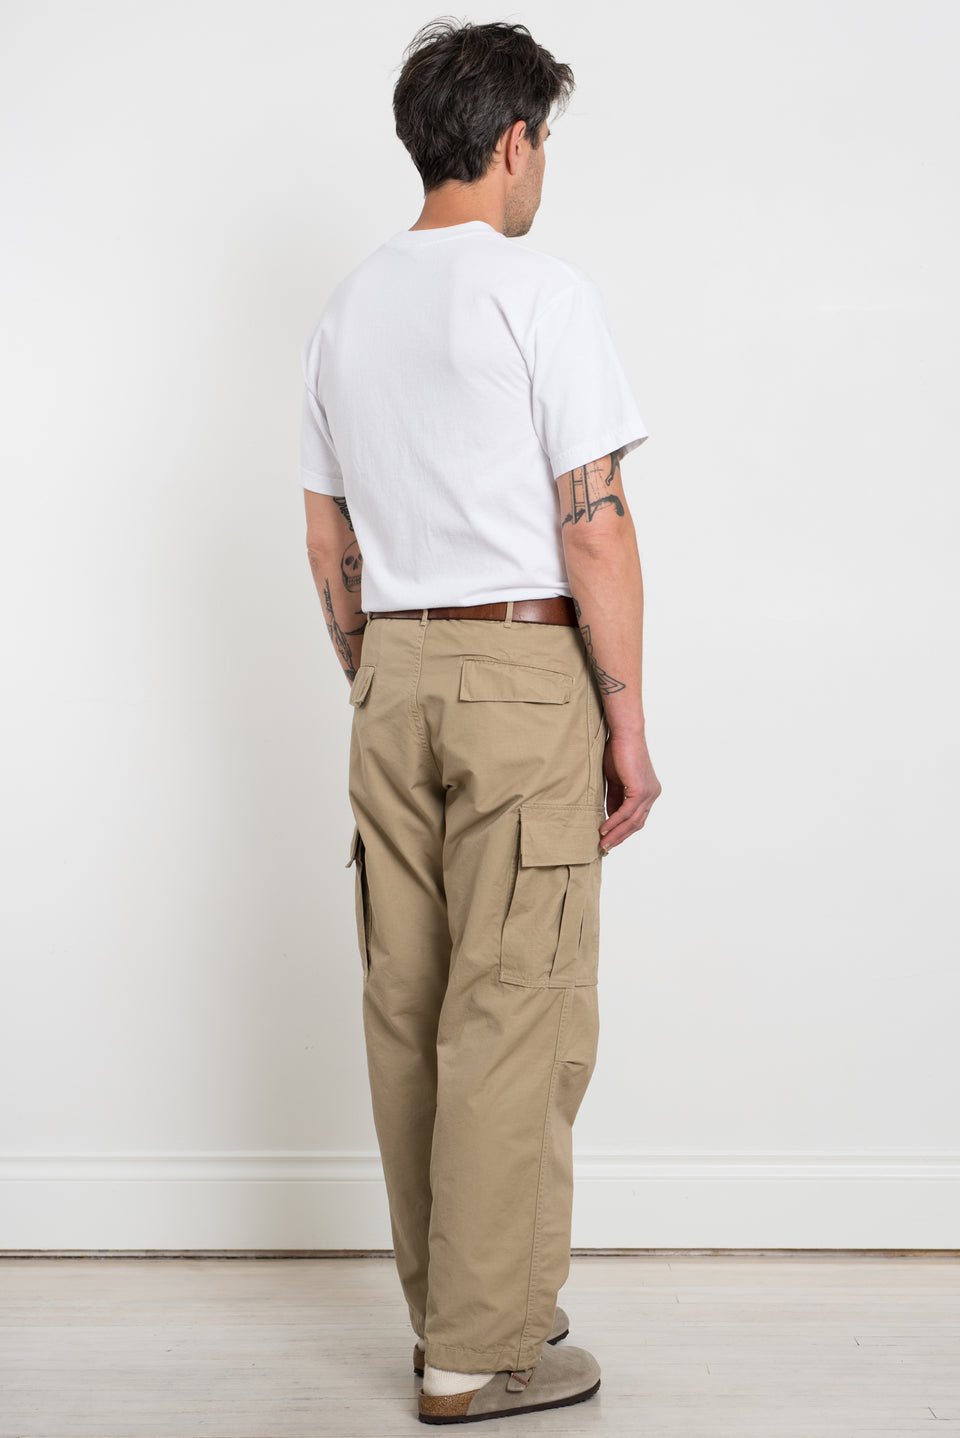 WRYIPSF Retro Pocket Letter Print Straight Cargo Pants Men and